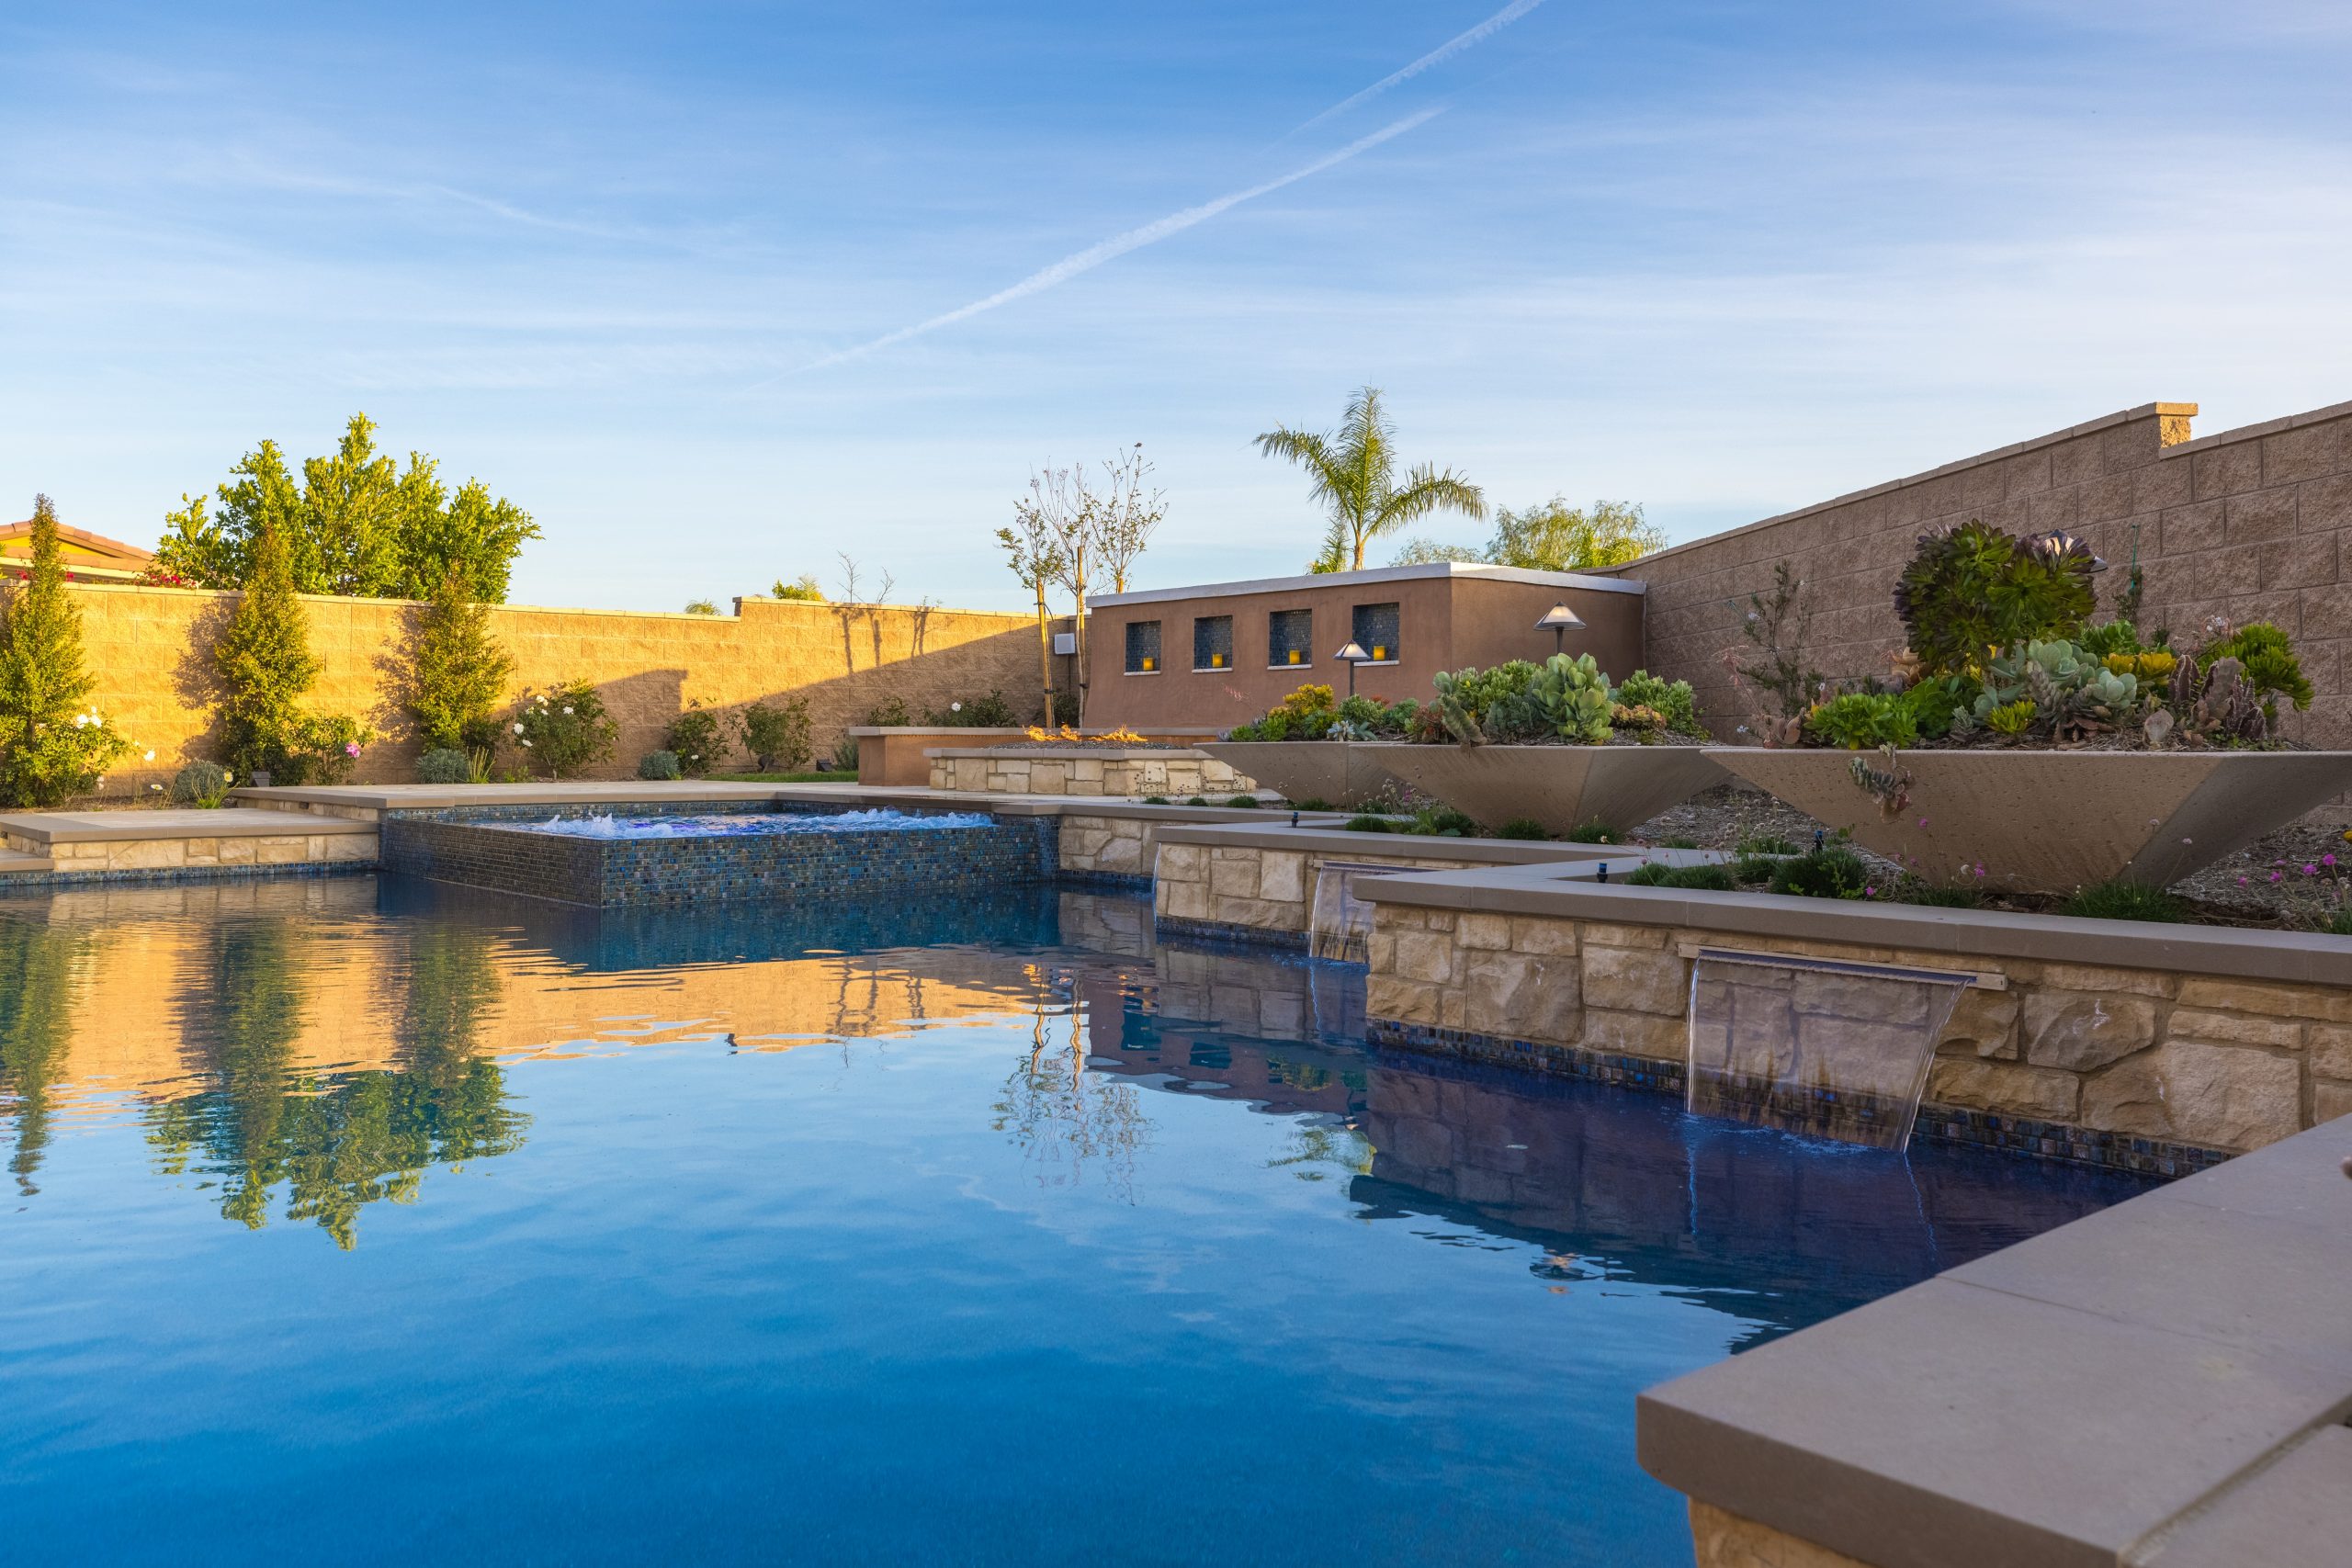 backyard with saving water drought resistant design like landscaping and low splash waterfalls in the pool